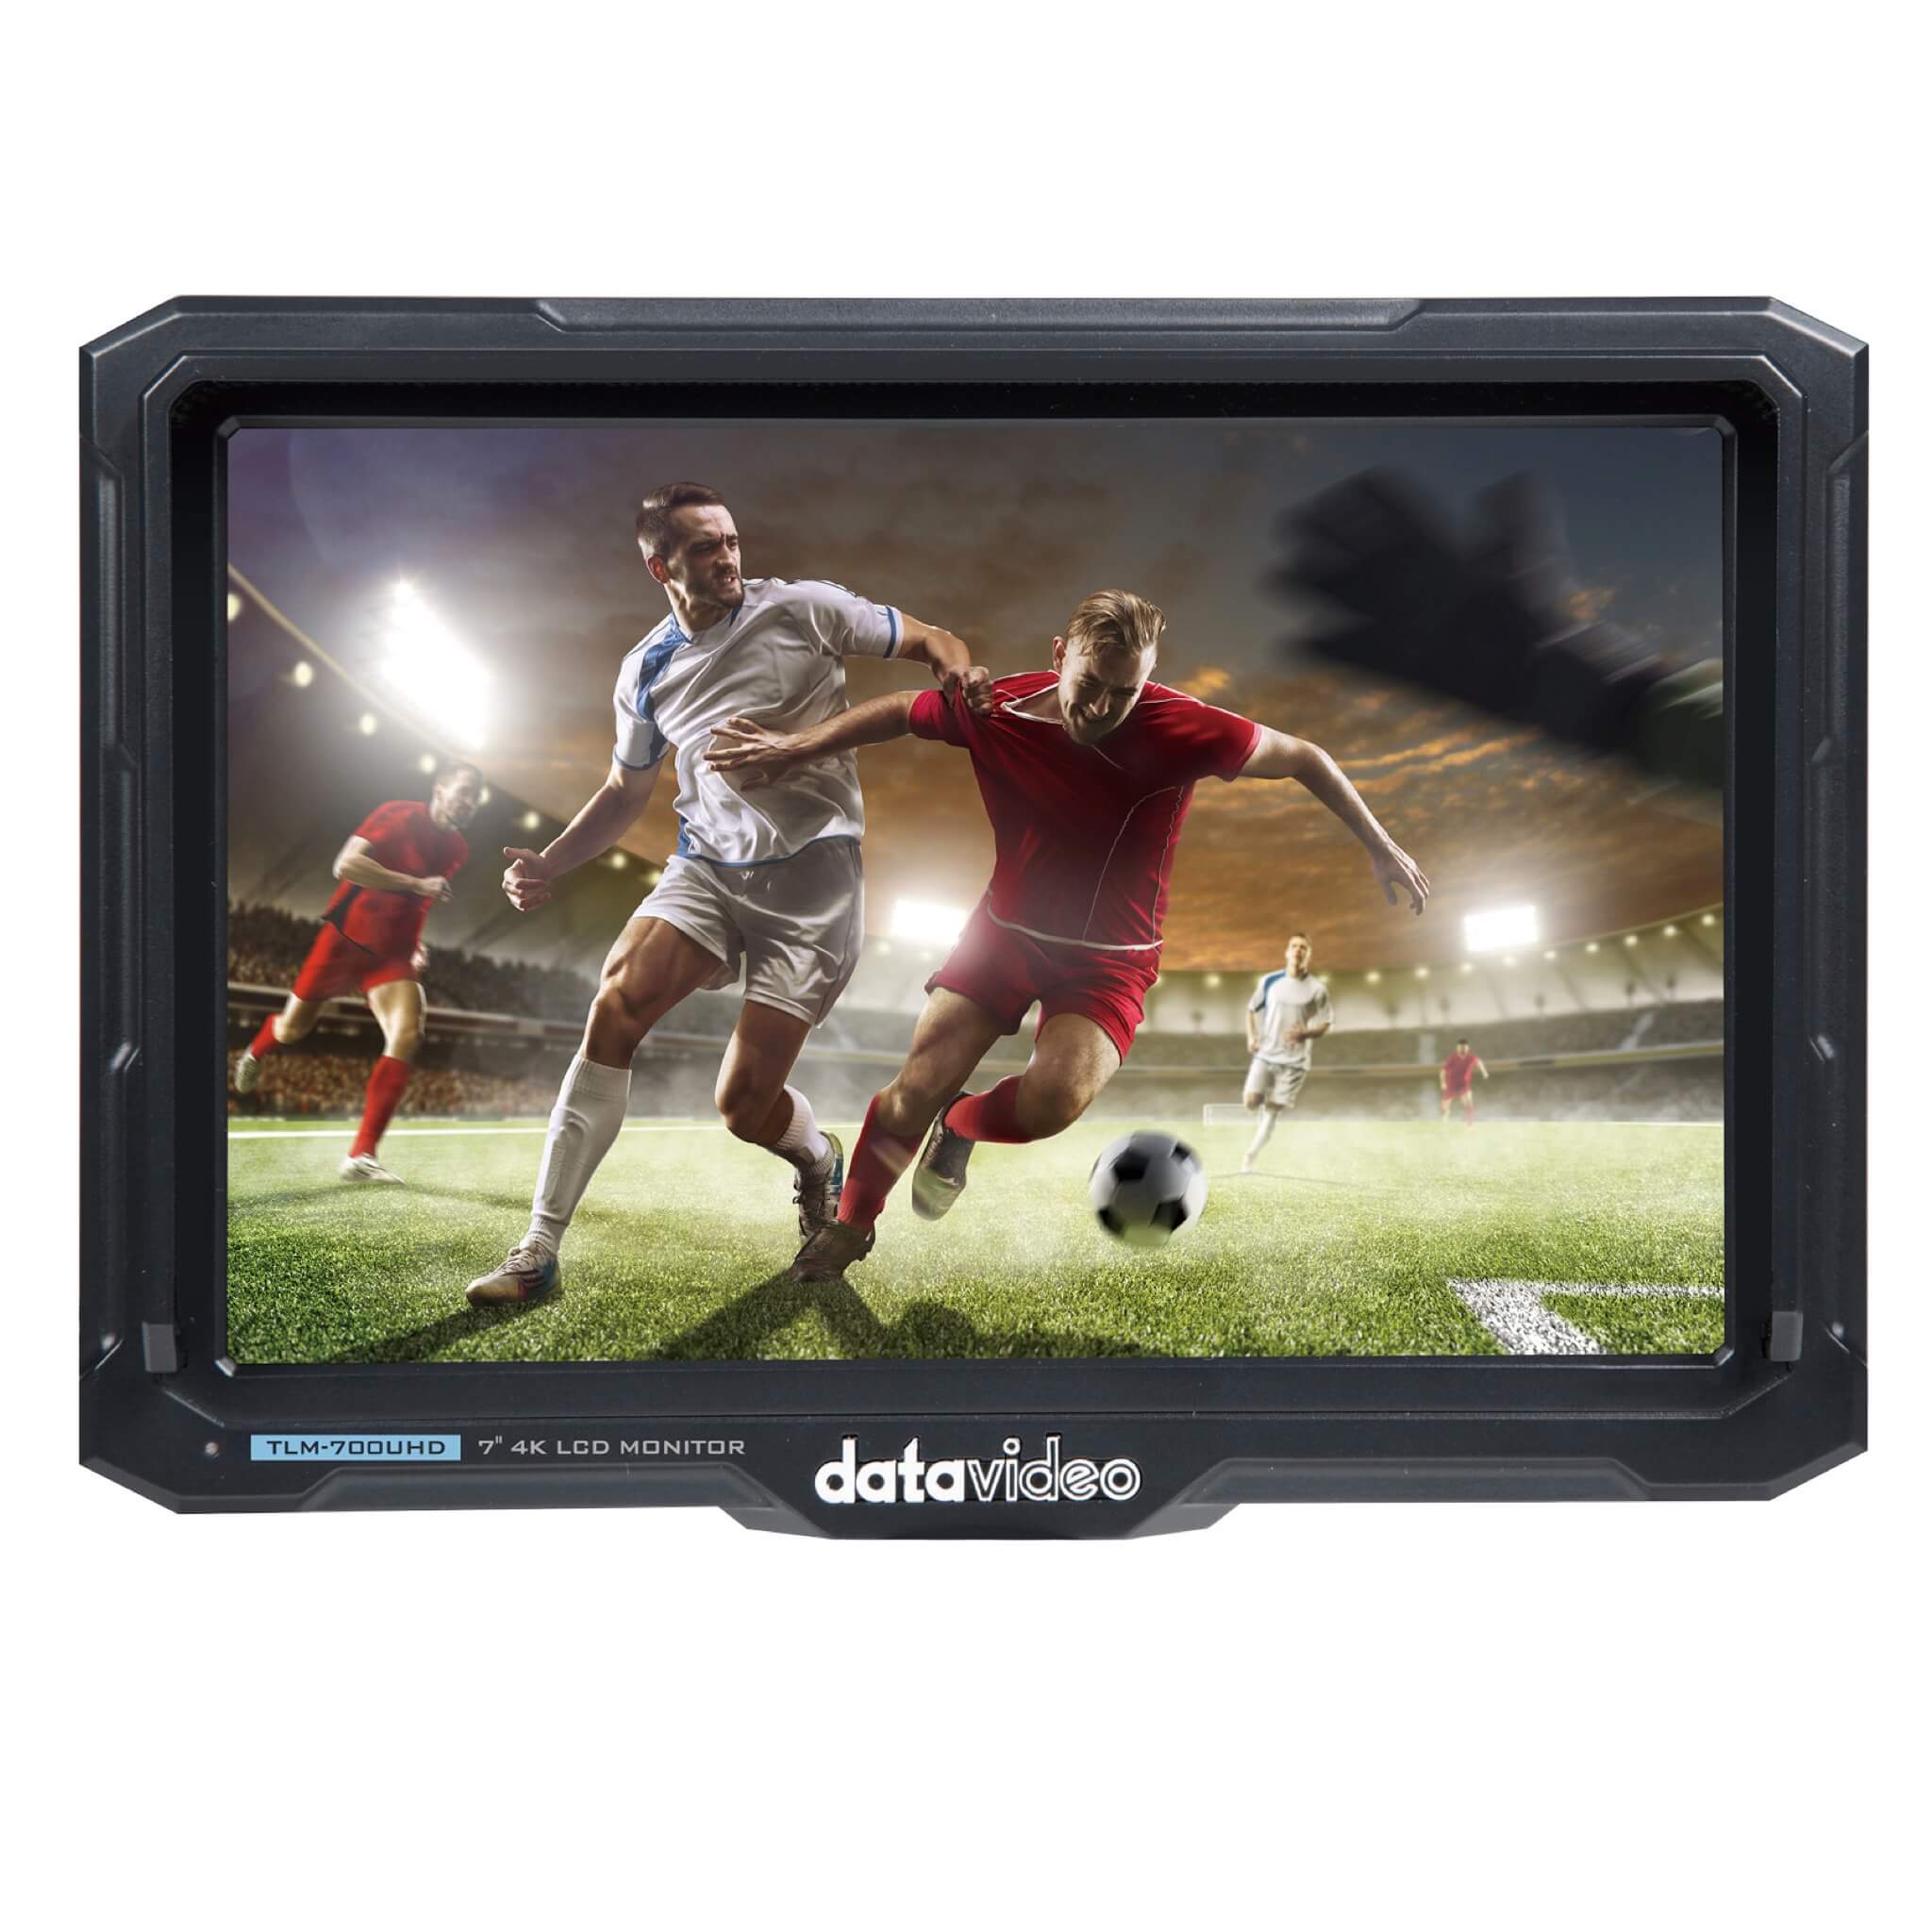 DataVideo TLM-700UHD - 7-inch 4K LCD Monitor, front